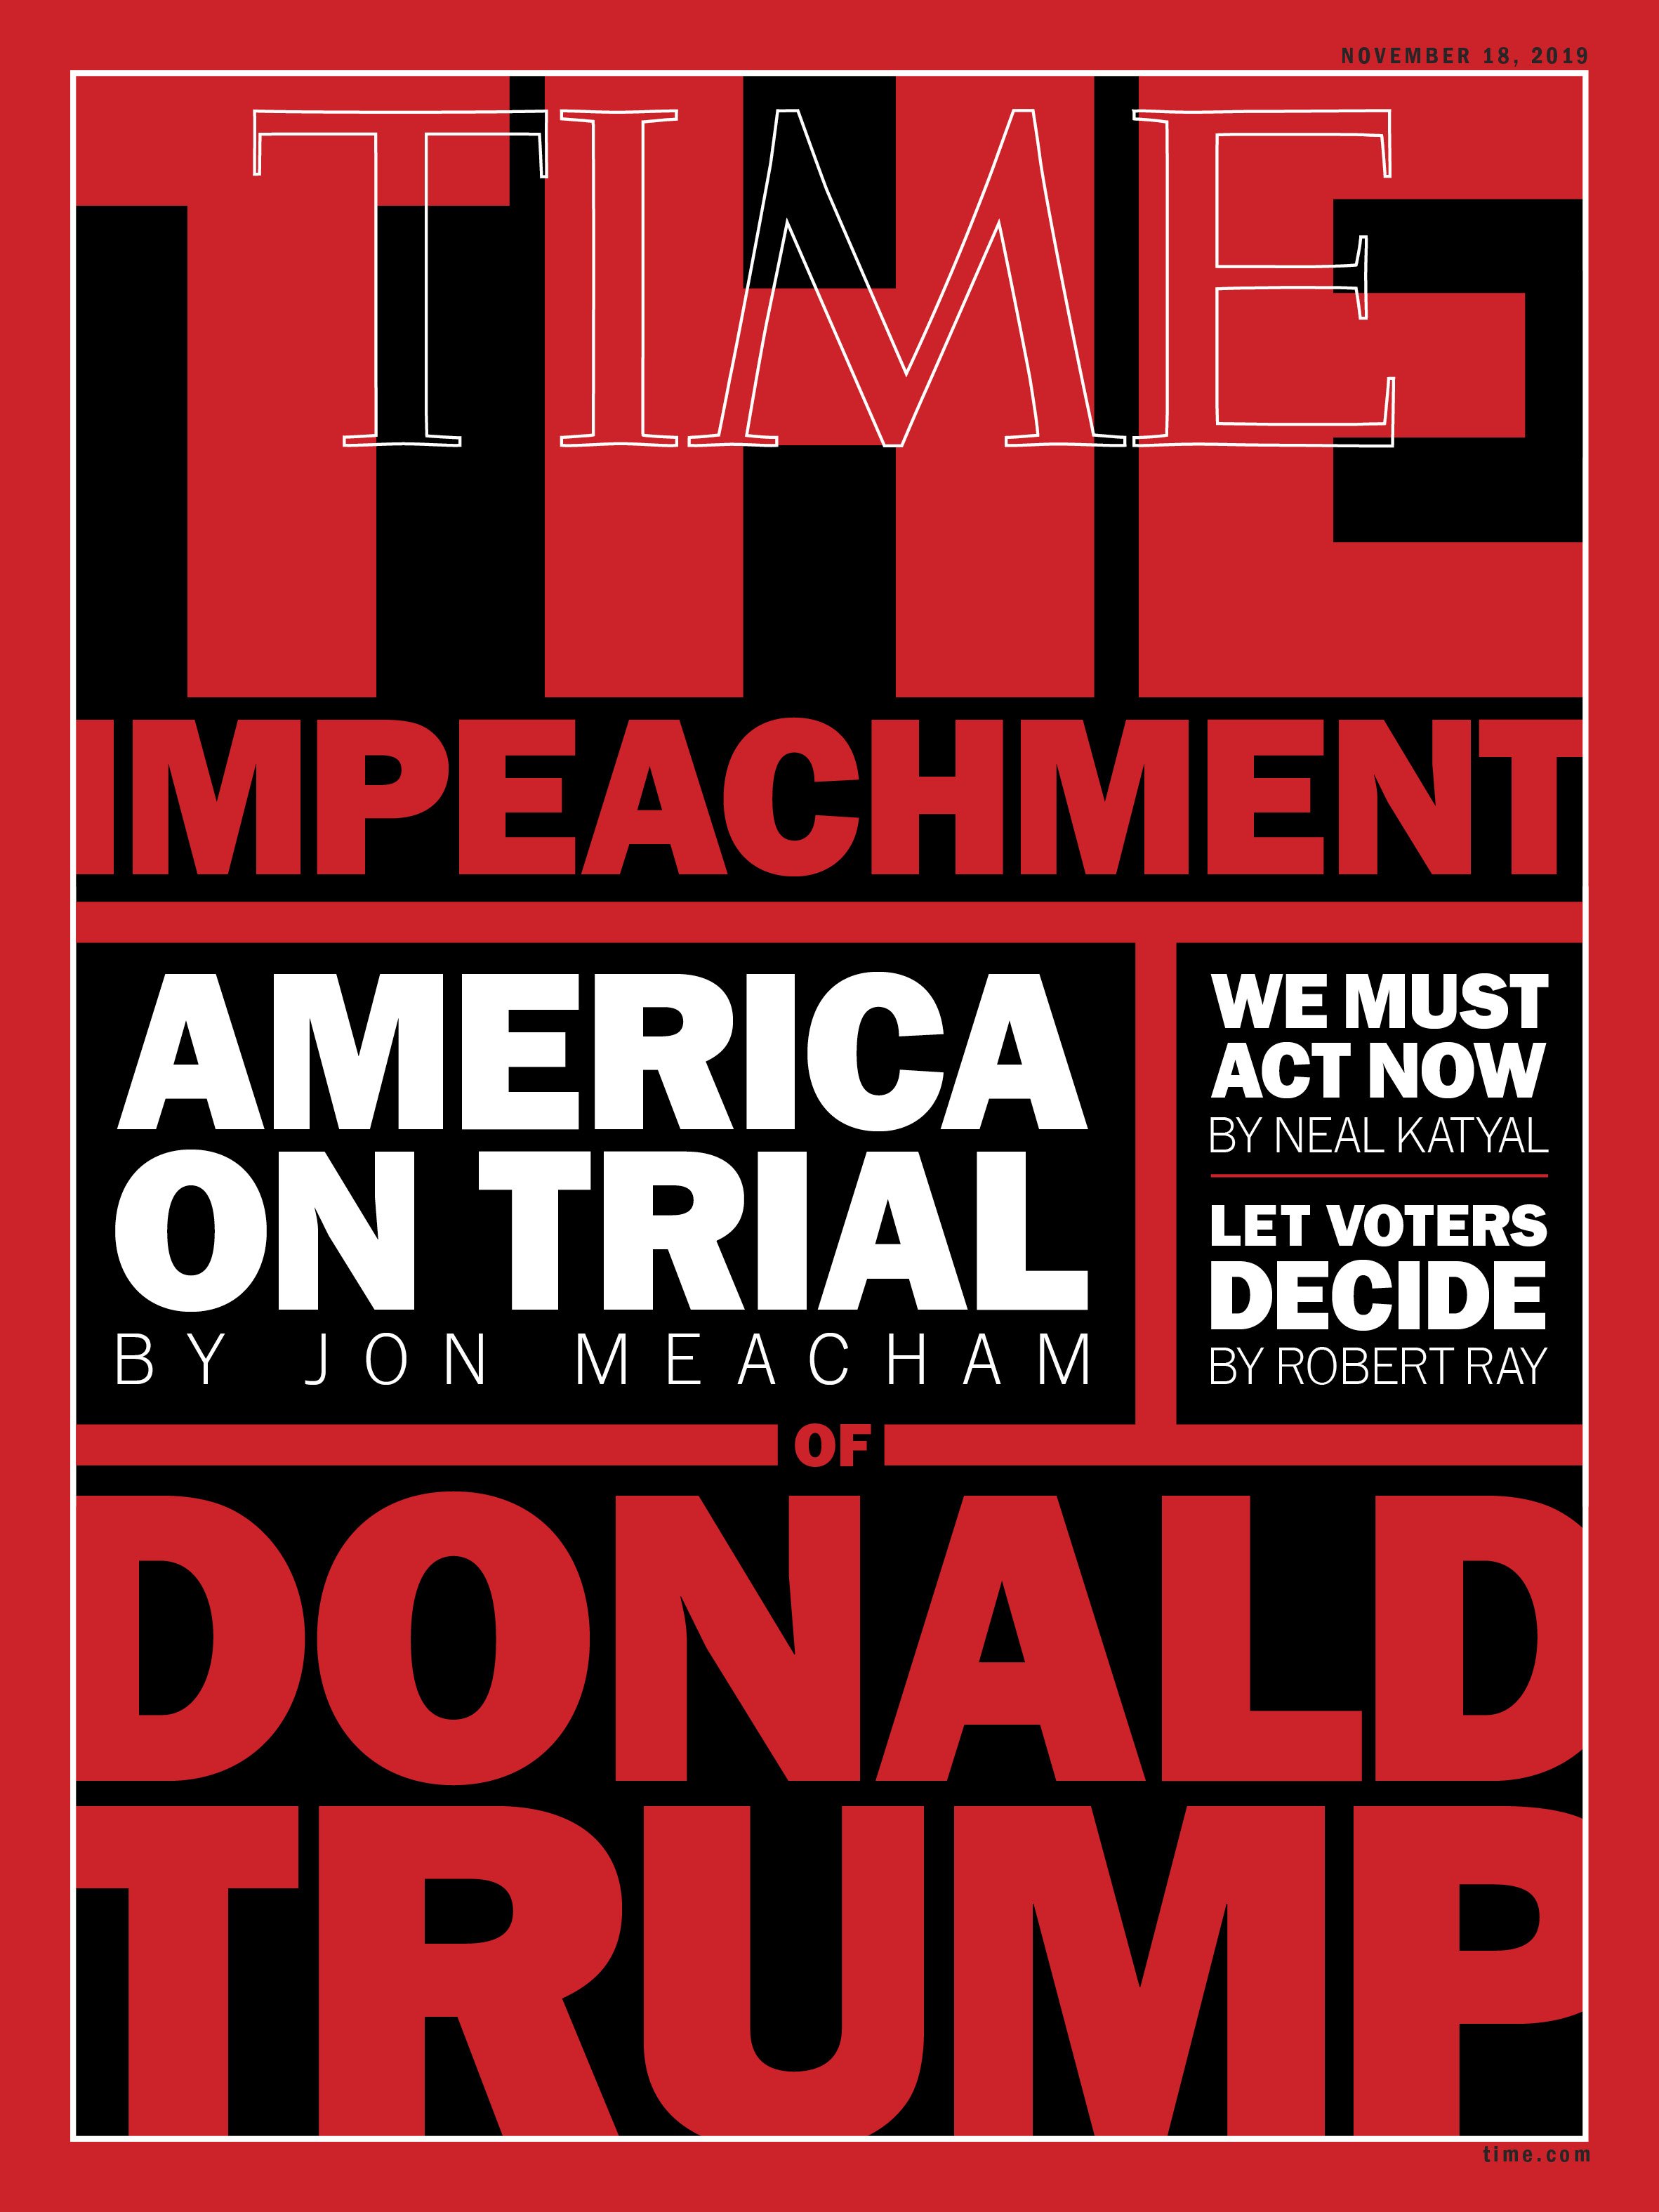 How to Watch the Impeachment: The People’s Role